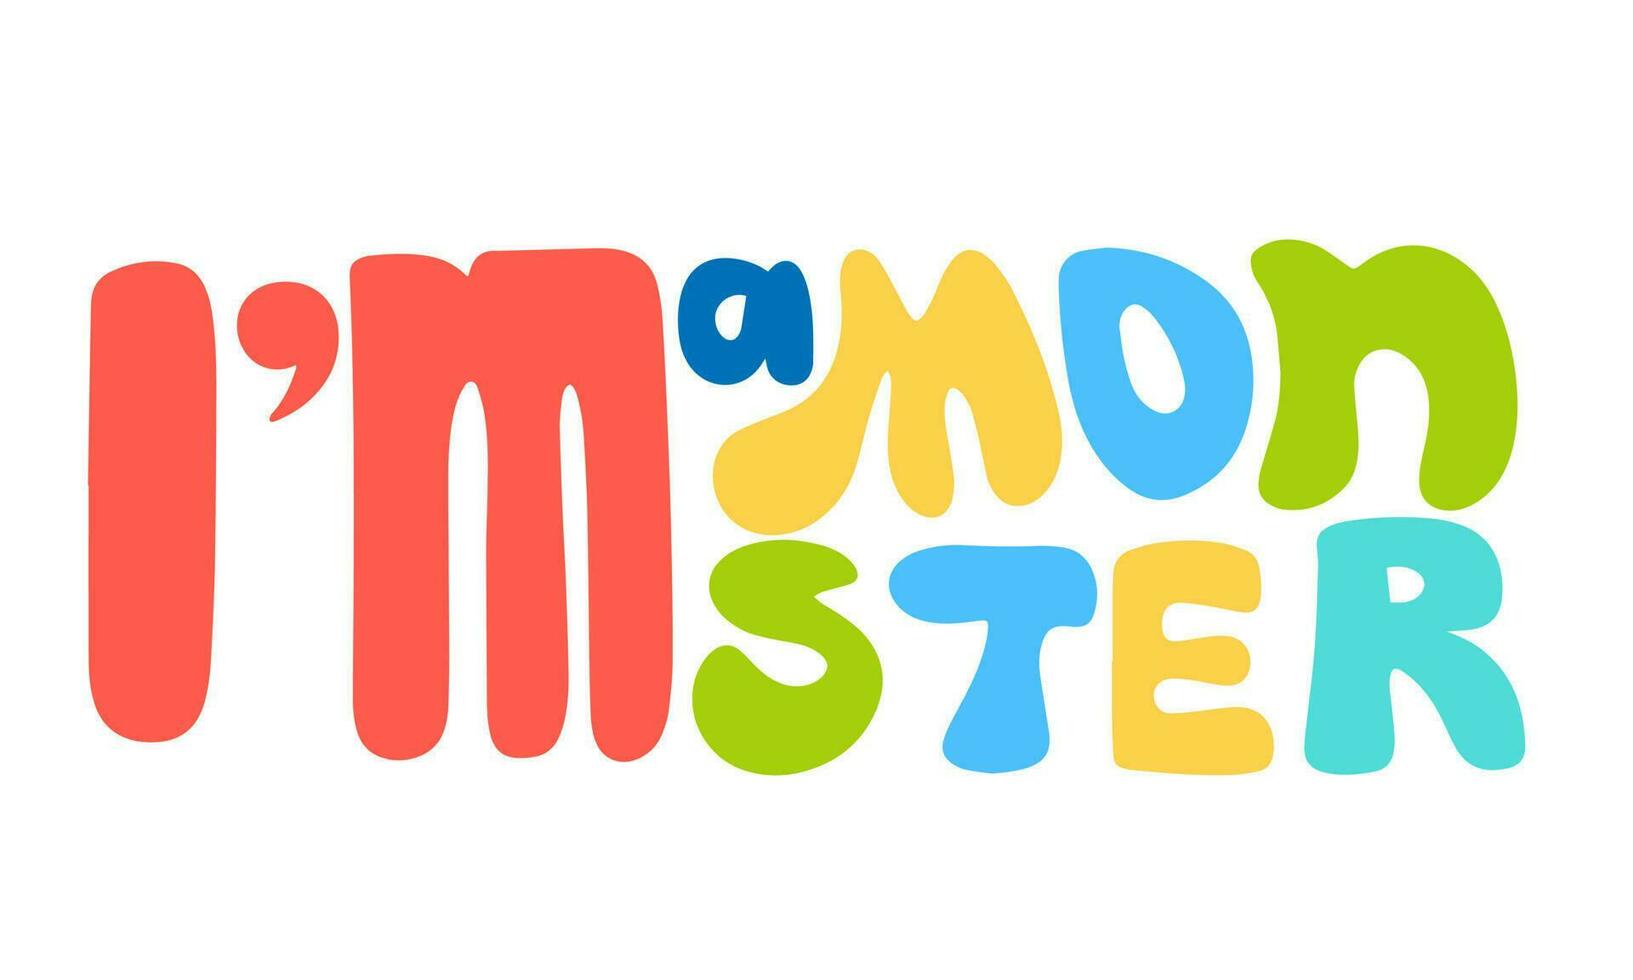 Cute vector hand drawn cartoon lettering quote i'm monster. Colorful banner. Could be used as design for greeting card, poster, T-Shirt, web-design etc.